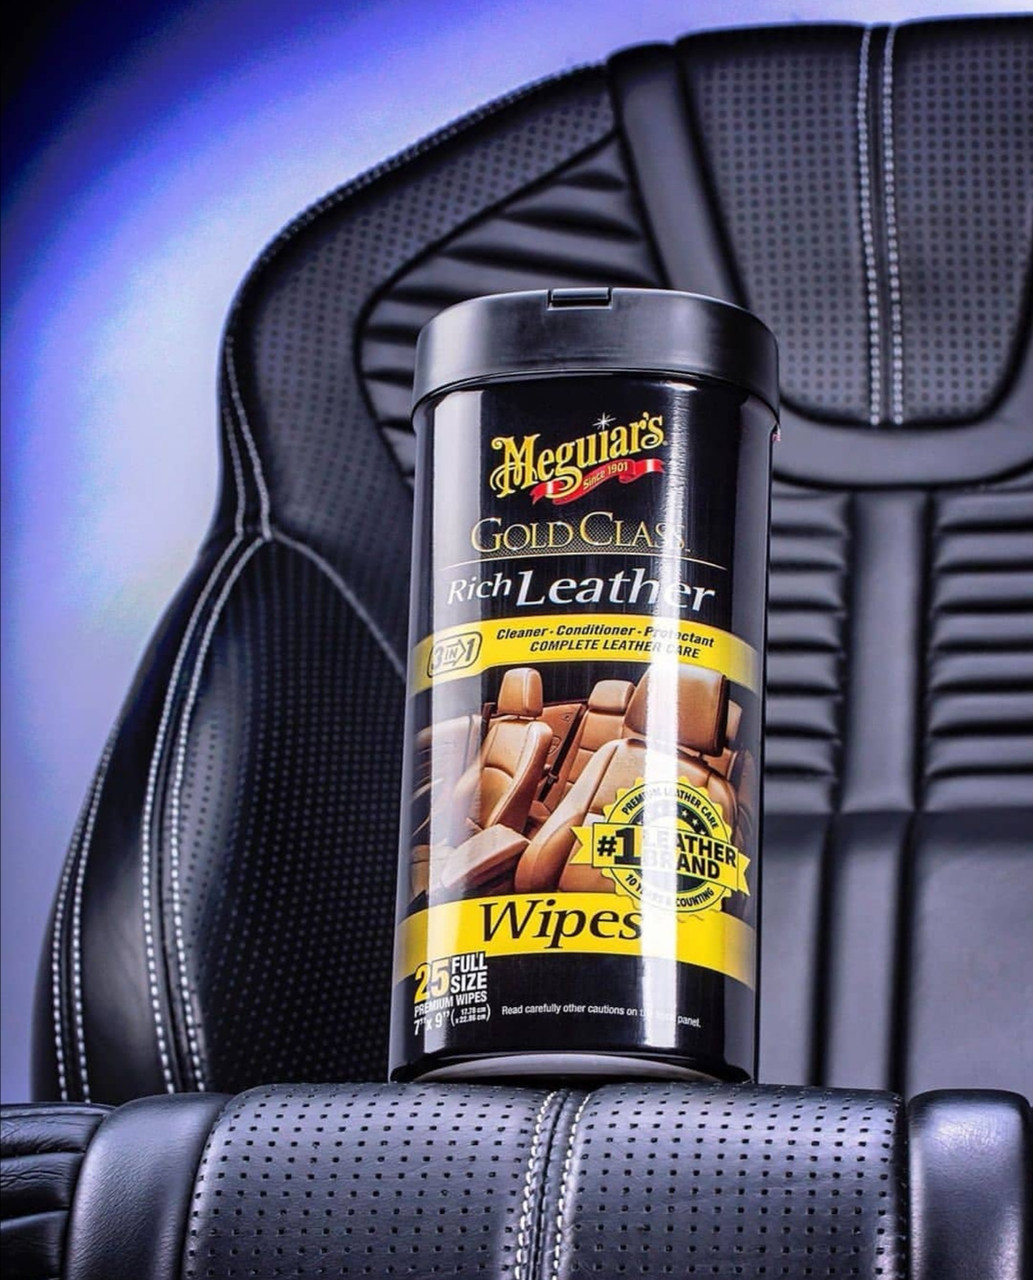 Meguiars G10900 Gold Class Leather Cleaner & Conditioner Wipes, 25-Ct.